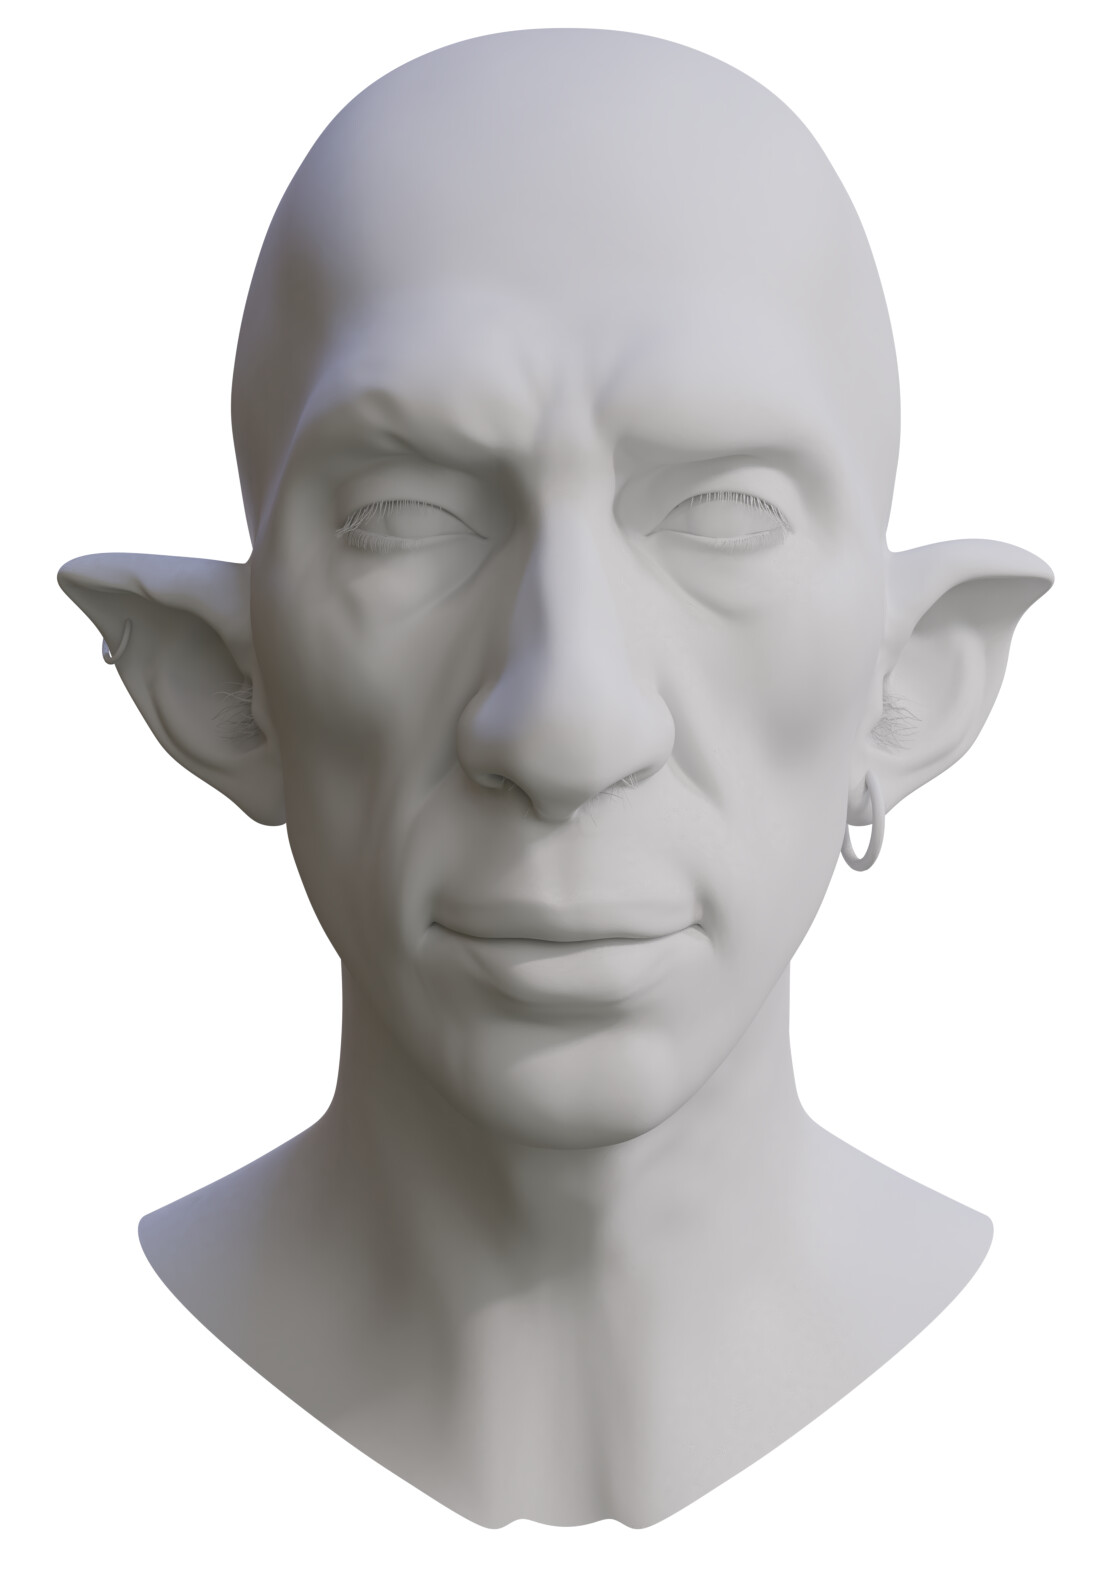 Realistic Goblin Head - Finished Projects - Blender Artists Community